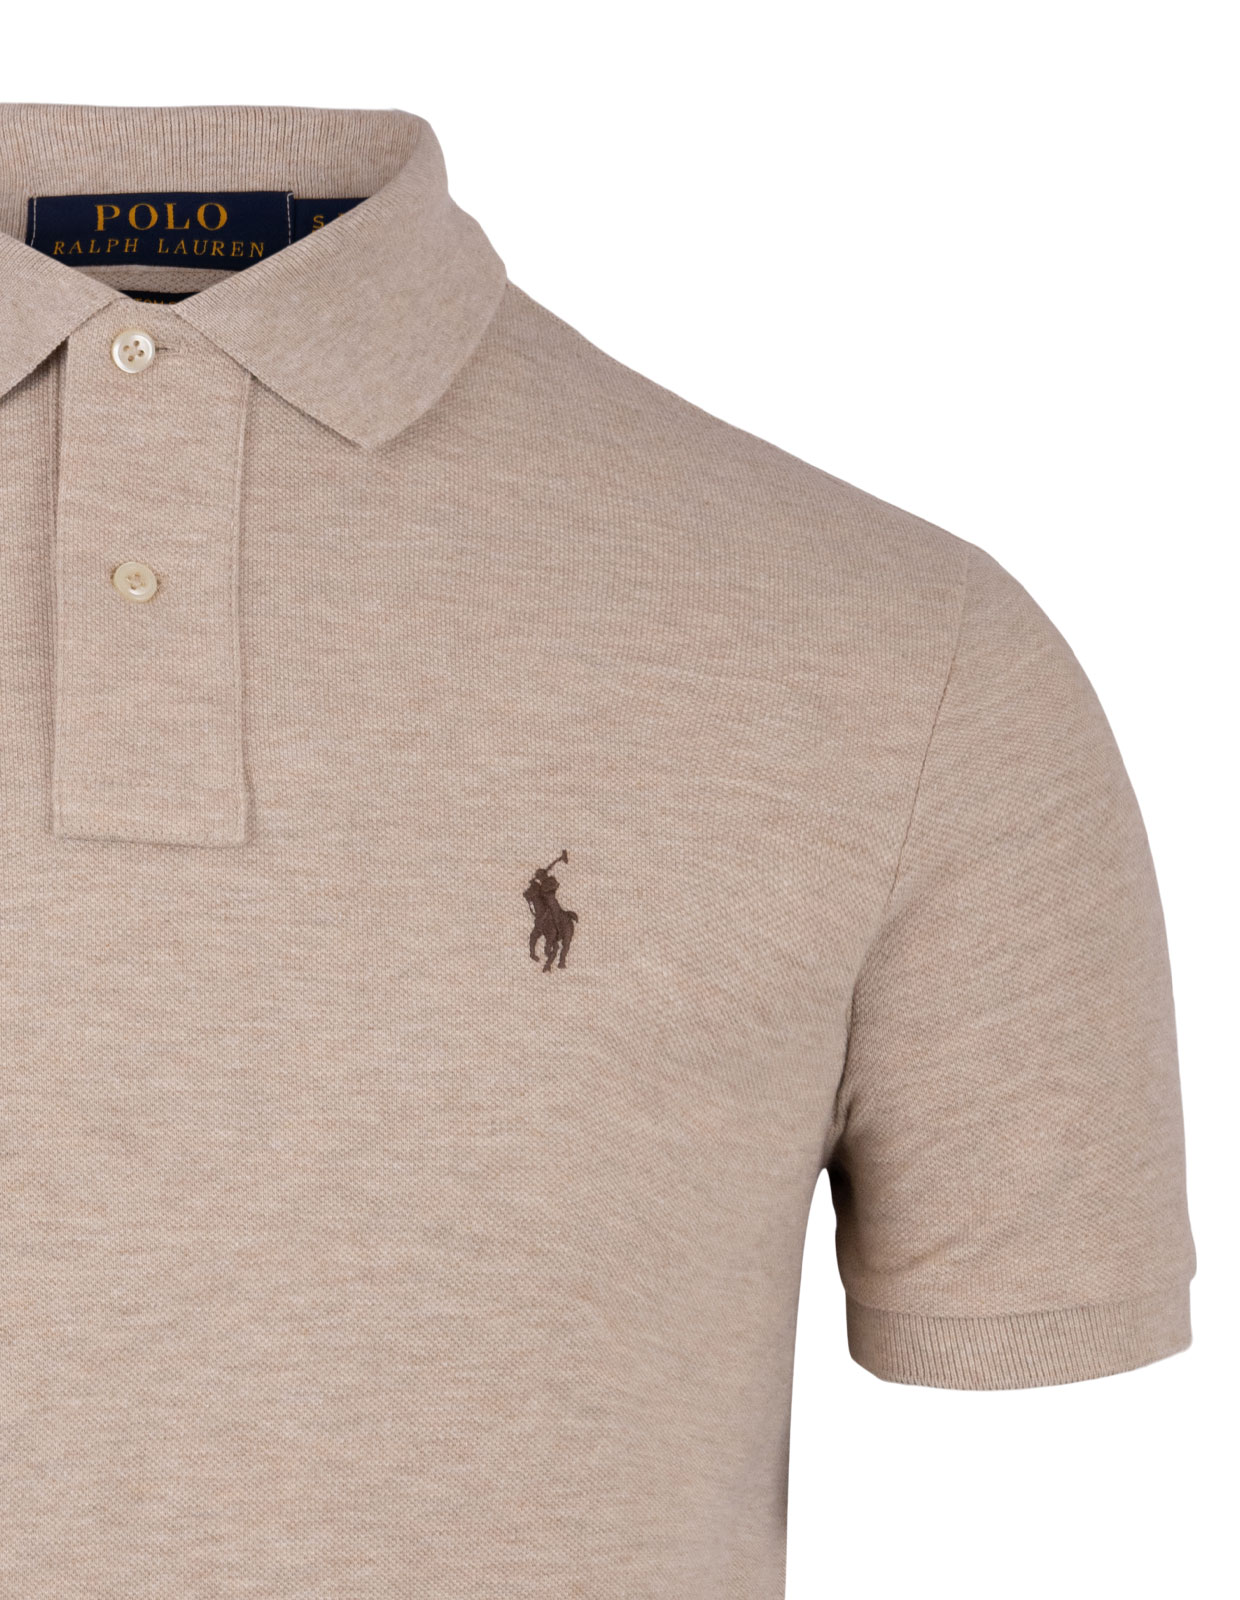 Custom Slim Fit Polo Expedition Dune Stl XL